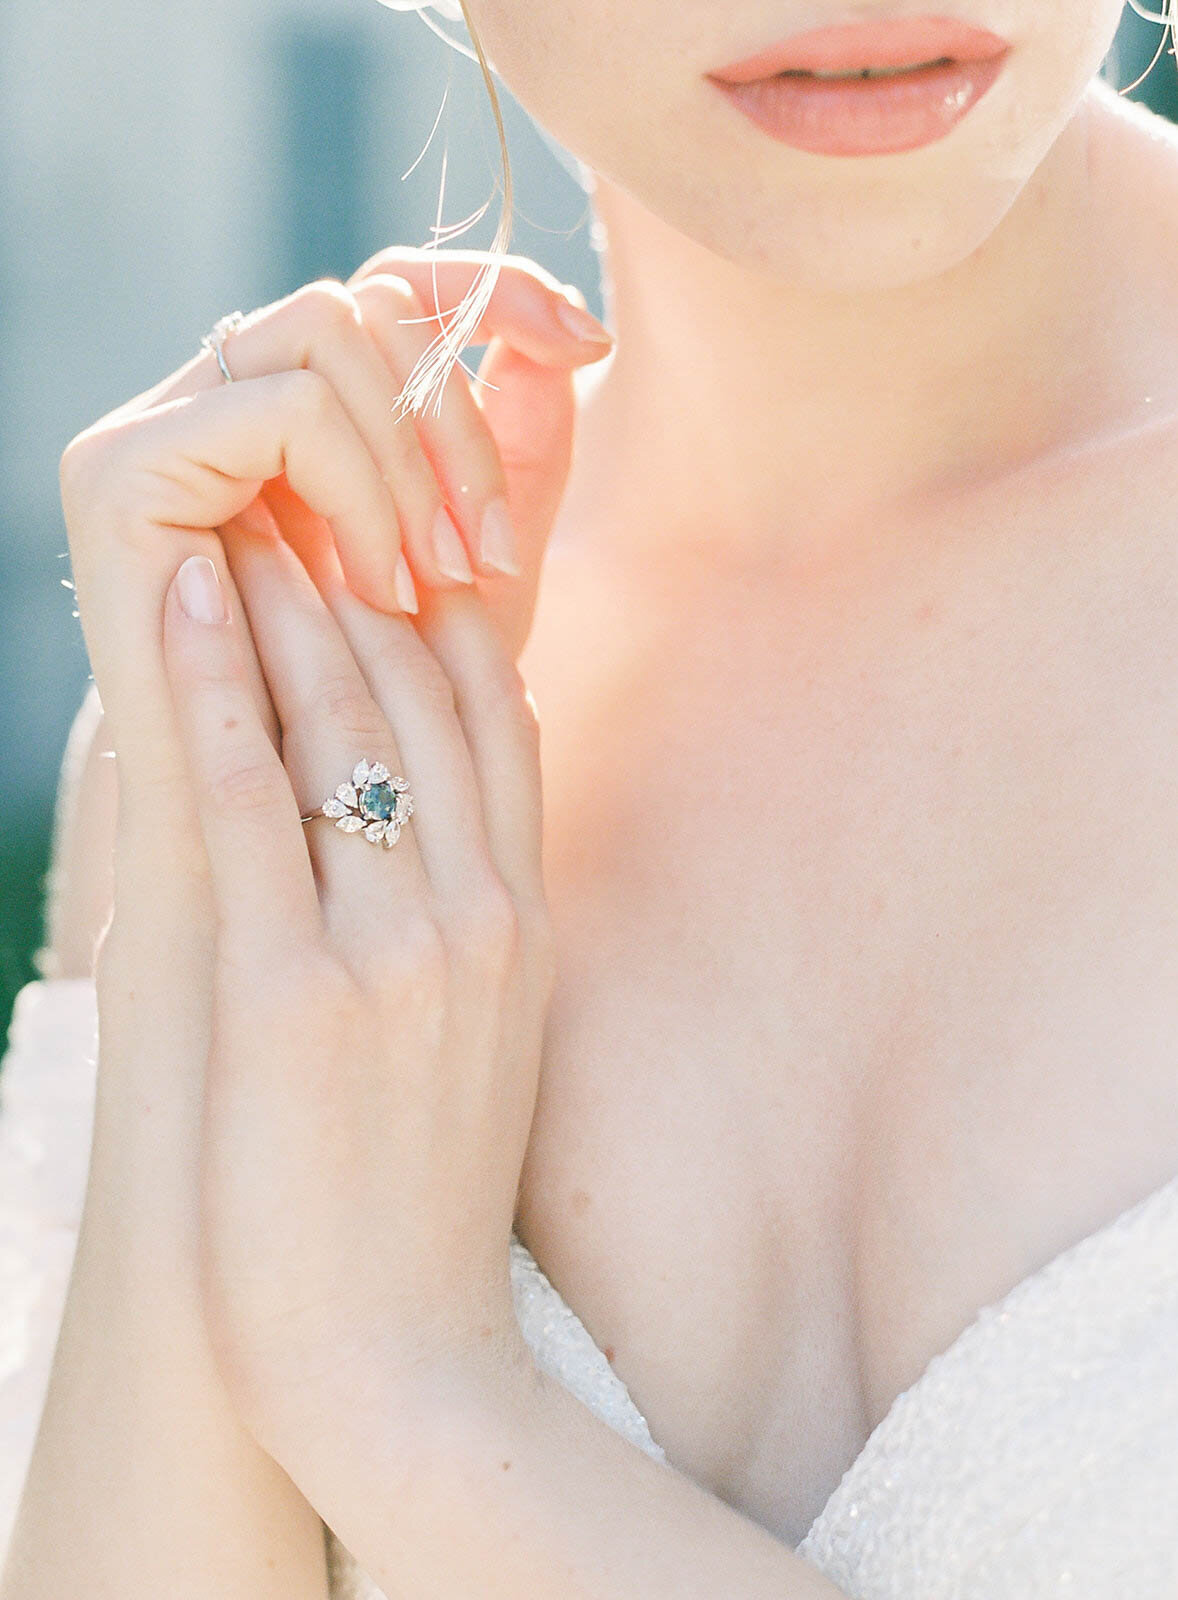 sapphire and diamond wedding ring worn by bride at Villa Sola Cabiati Wedding on Lake Como photographed by Italy Wedding photographer